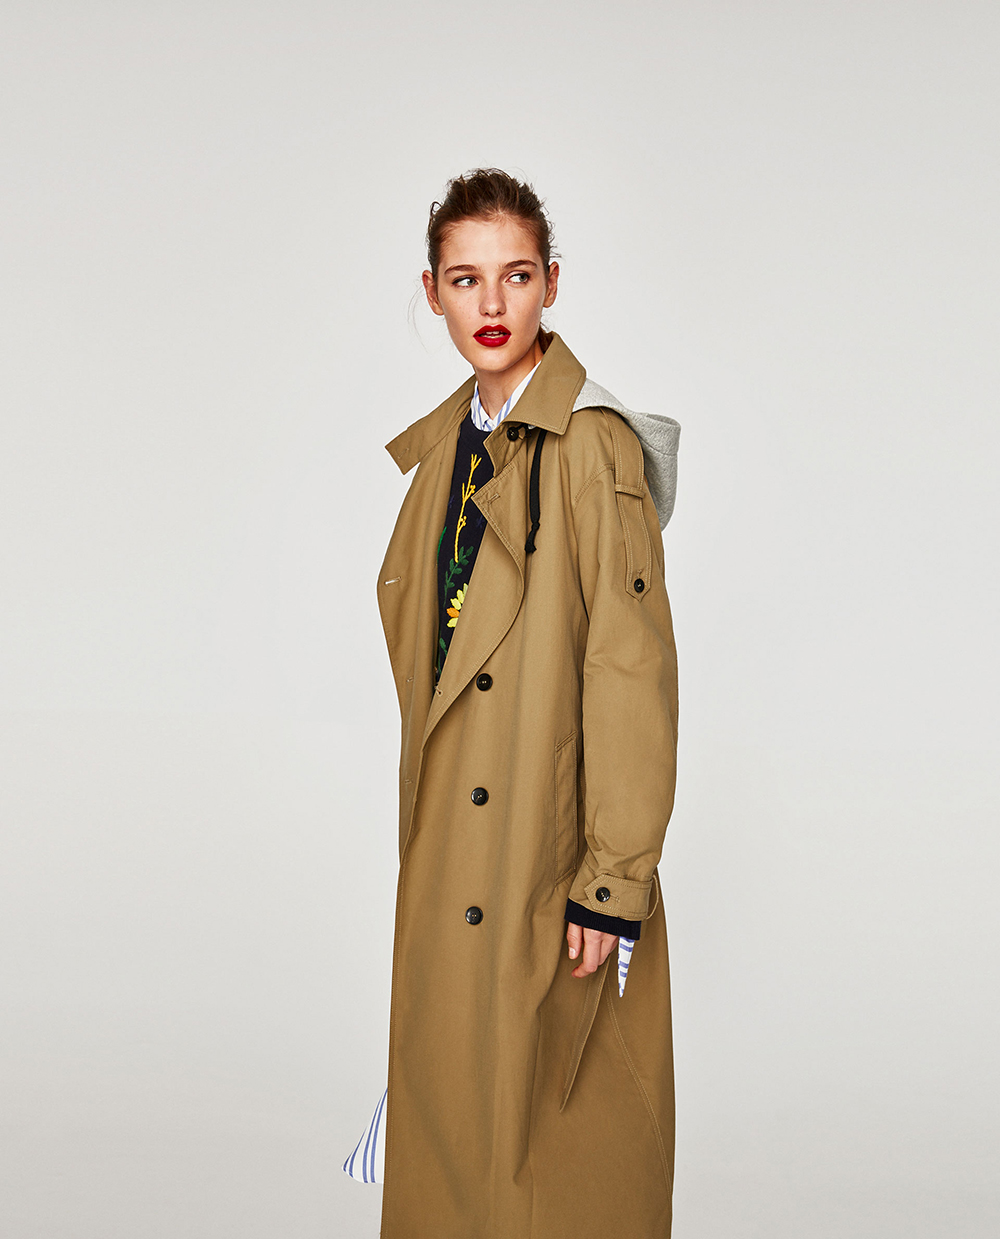 The 10 Best Trench Coats From Zara – Honestly WTF